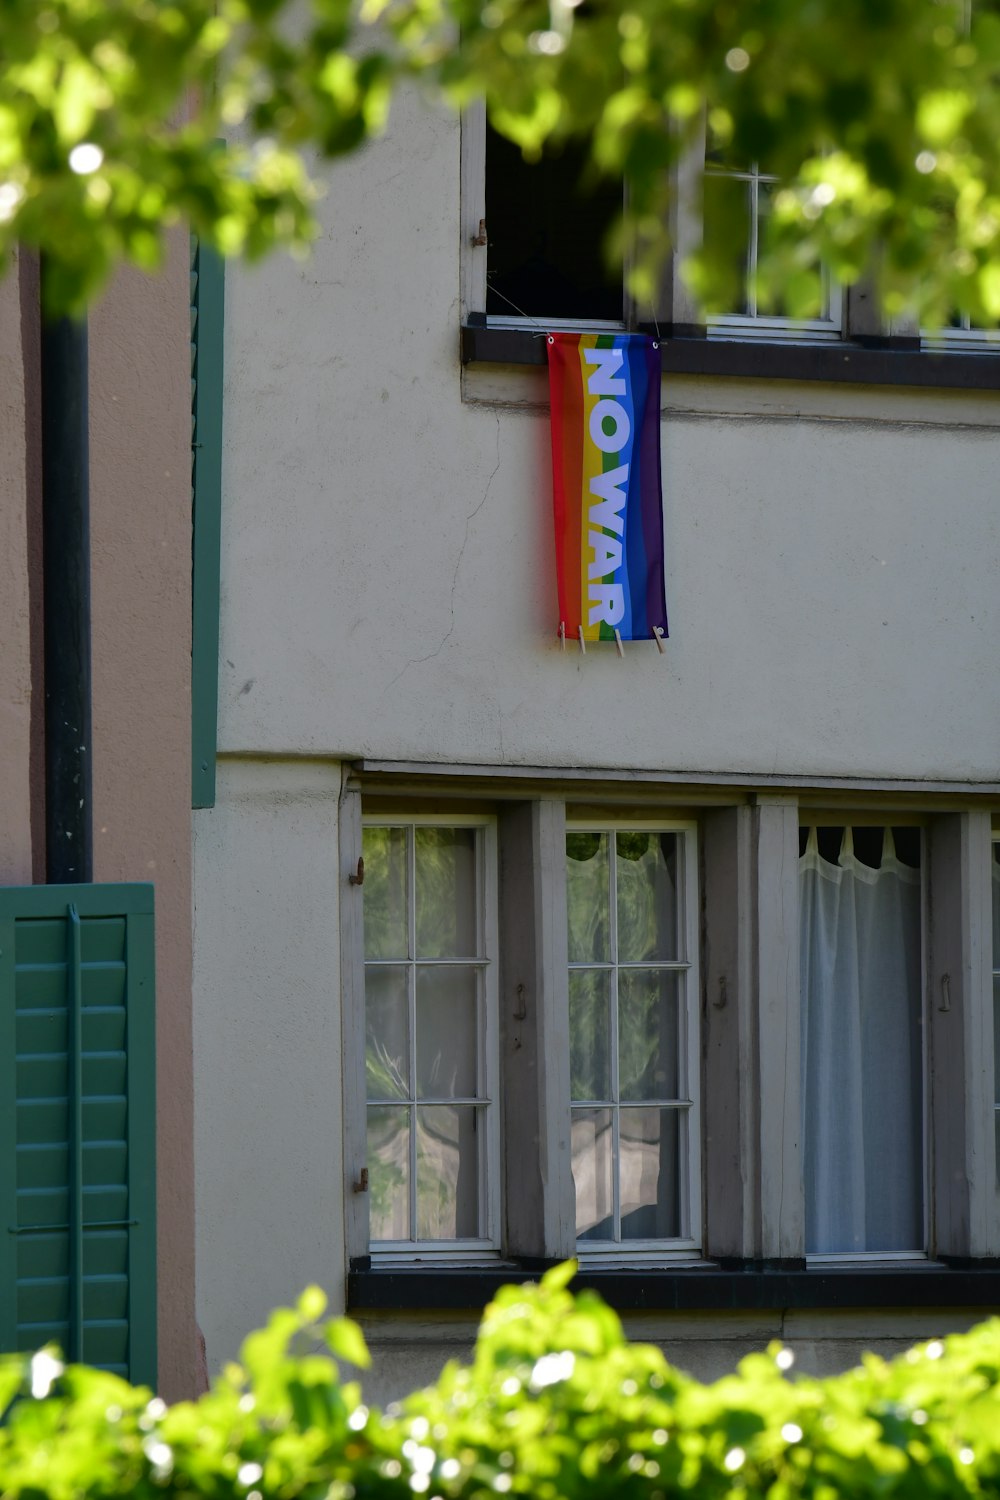 a flag hanging from the side of a building